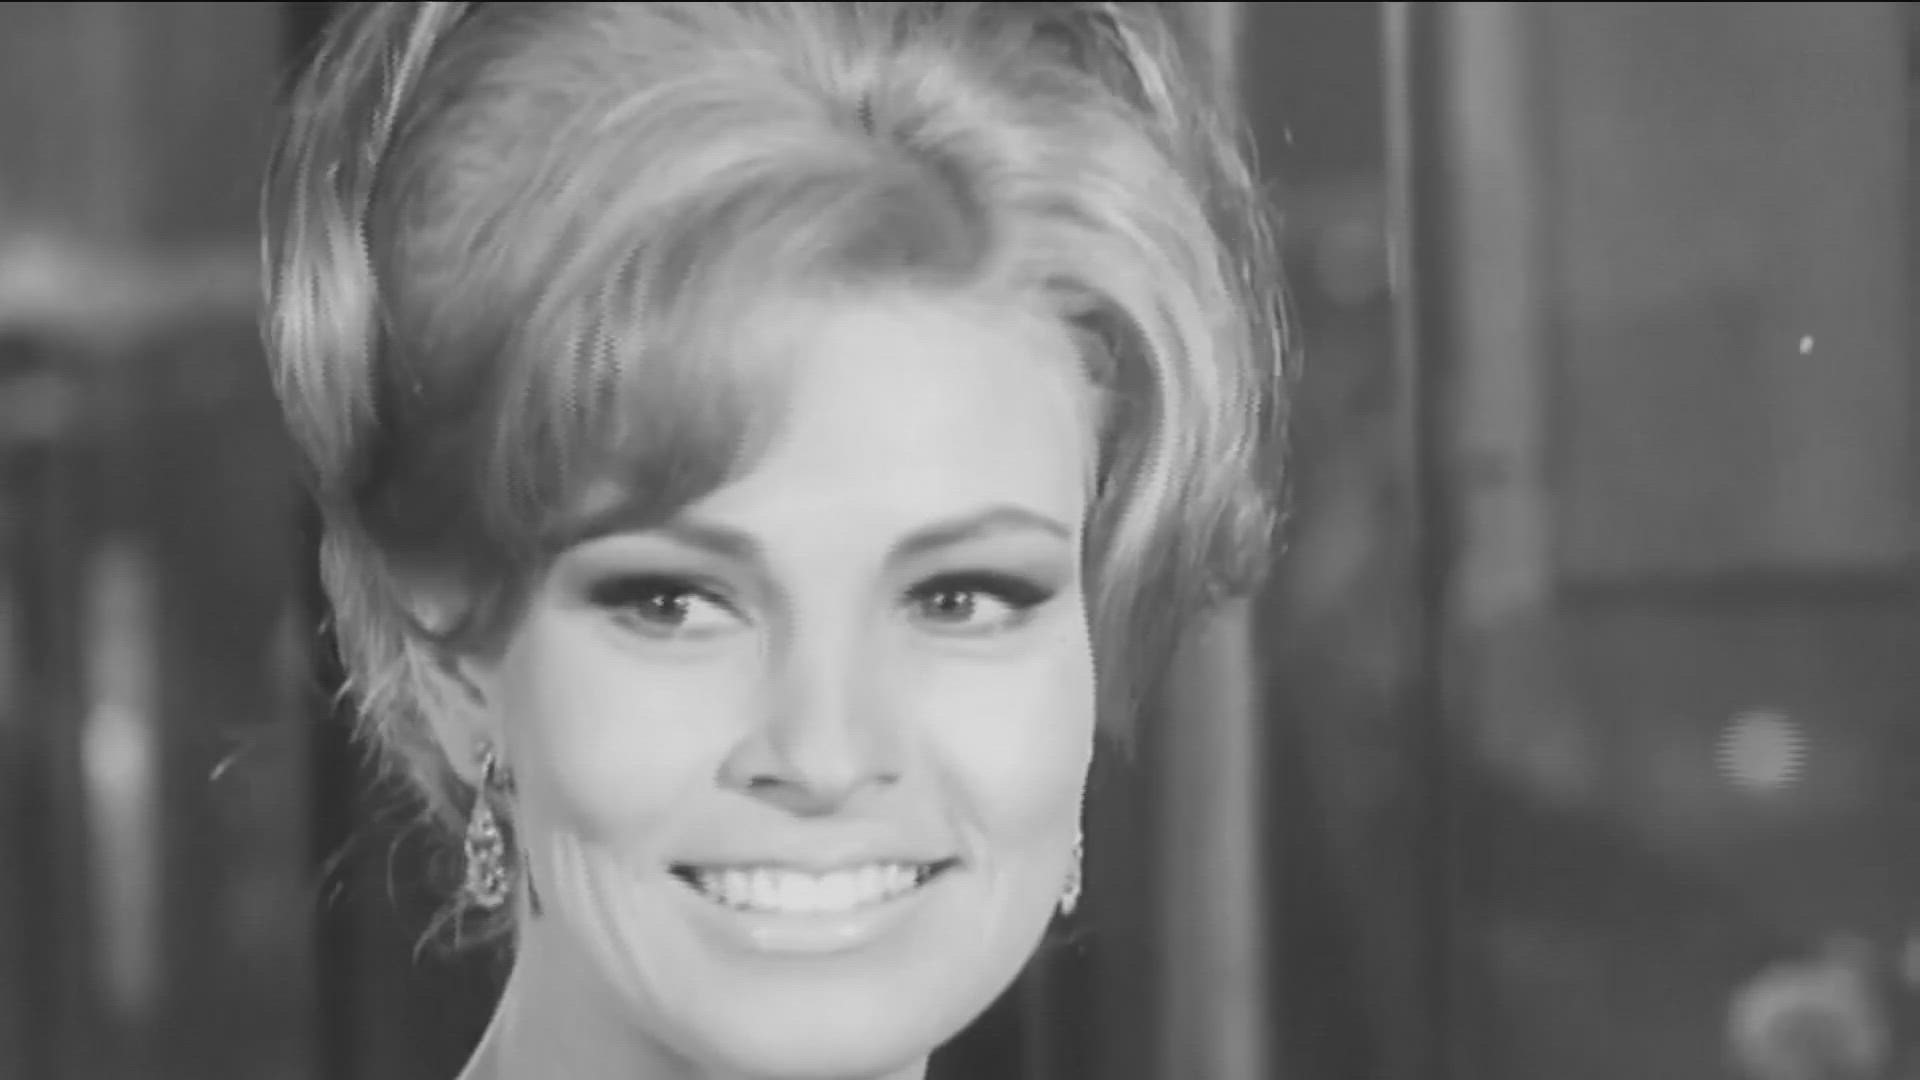 Former San Diego weatherwoman and Hollywood icon who appeared on CBS 8's “Sun Up” in the 1960s has died after a brief illness, according to reports.